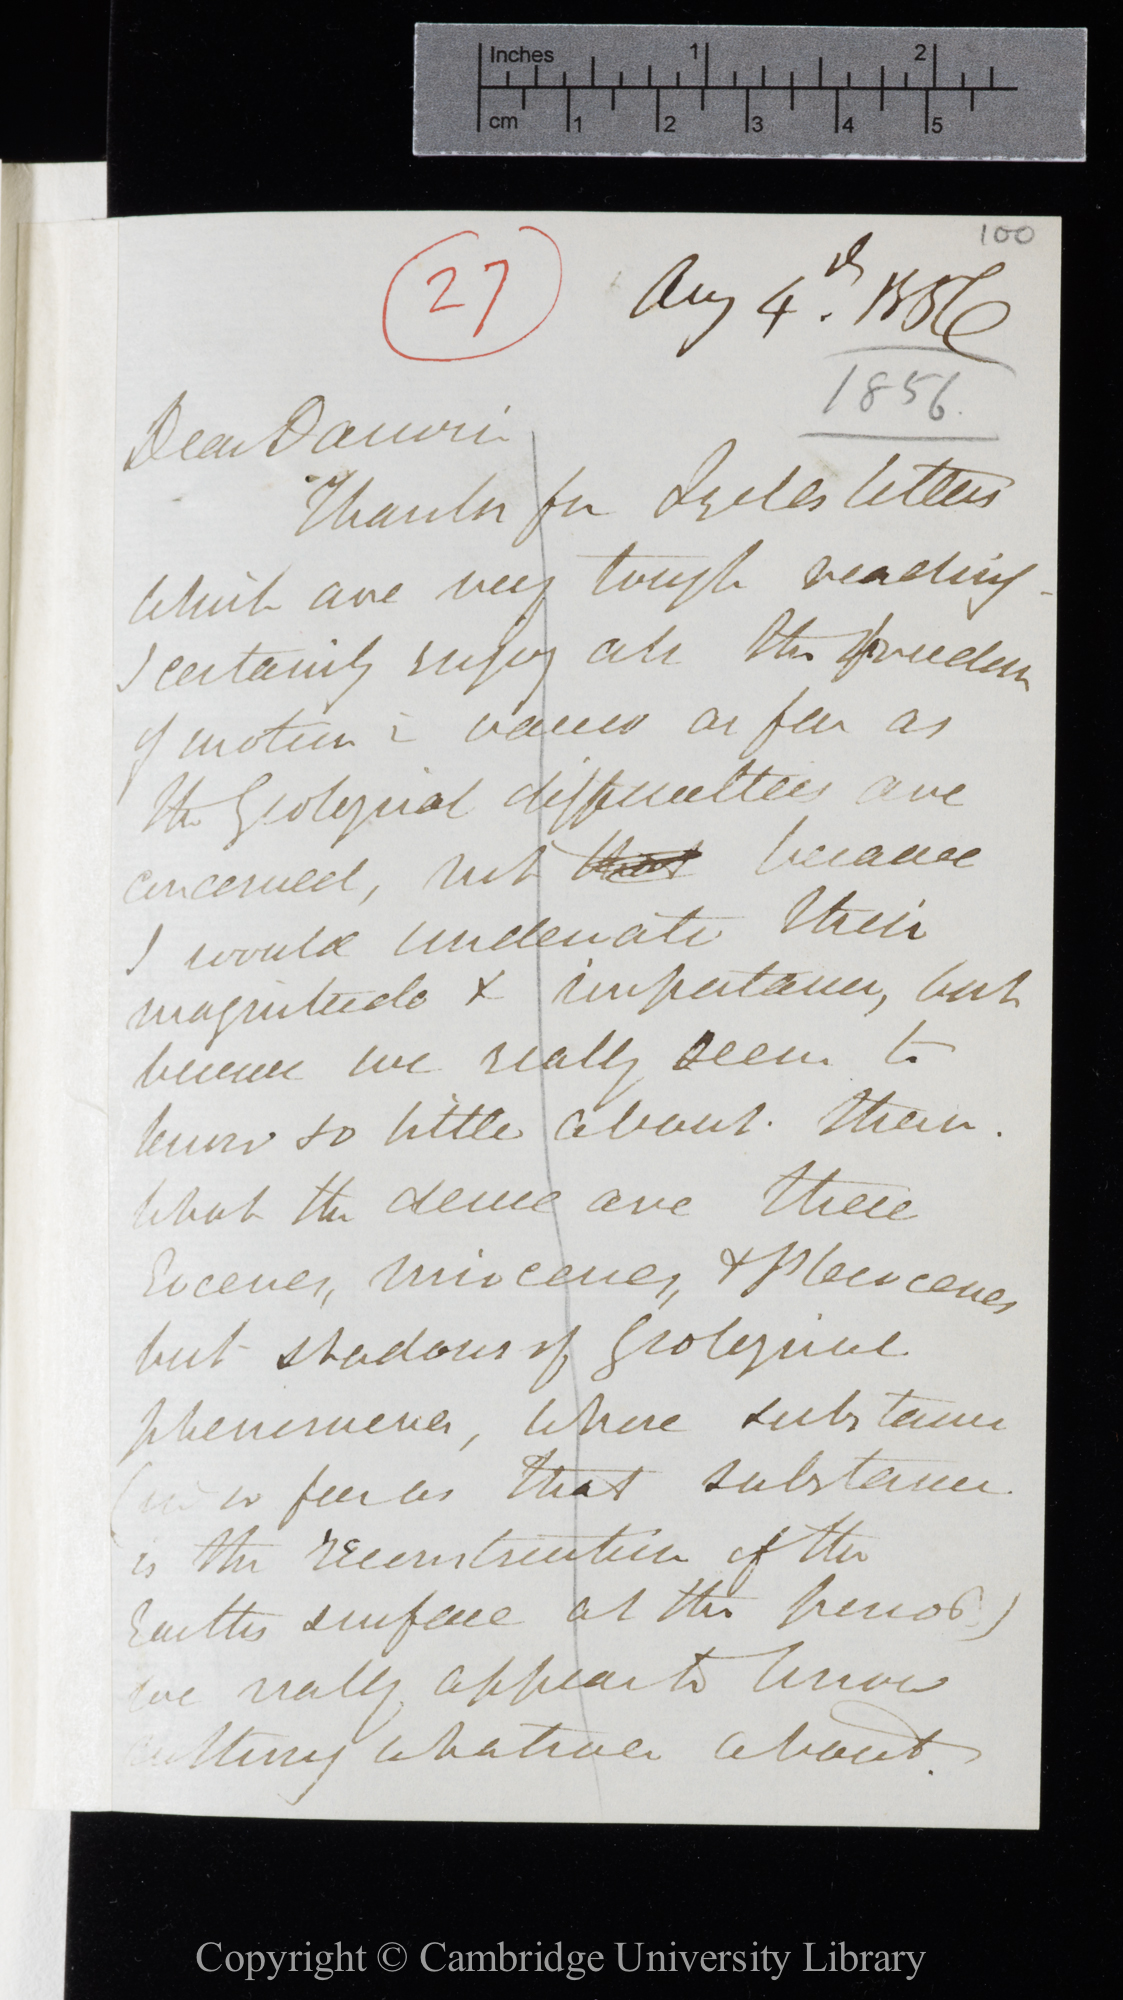 Letter from J. D. Hooker to C. R. Darwin   4 August 1856